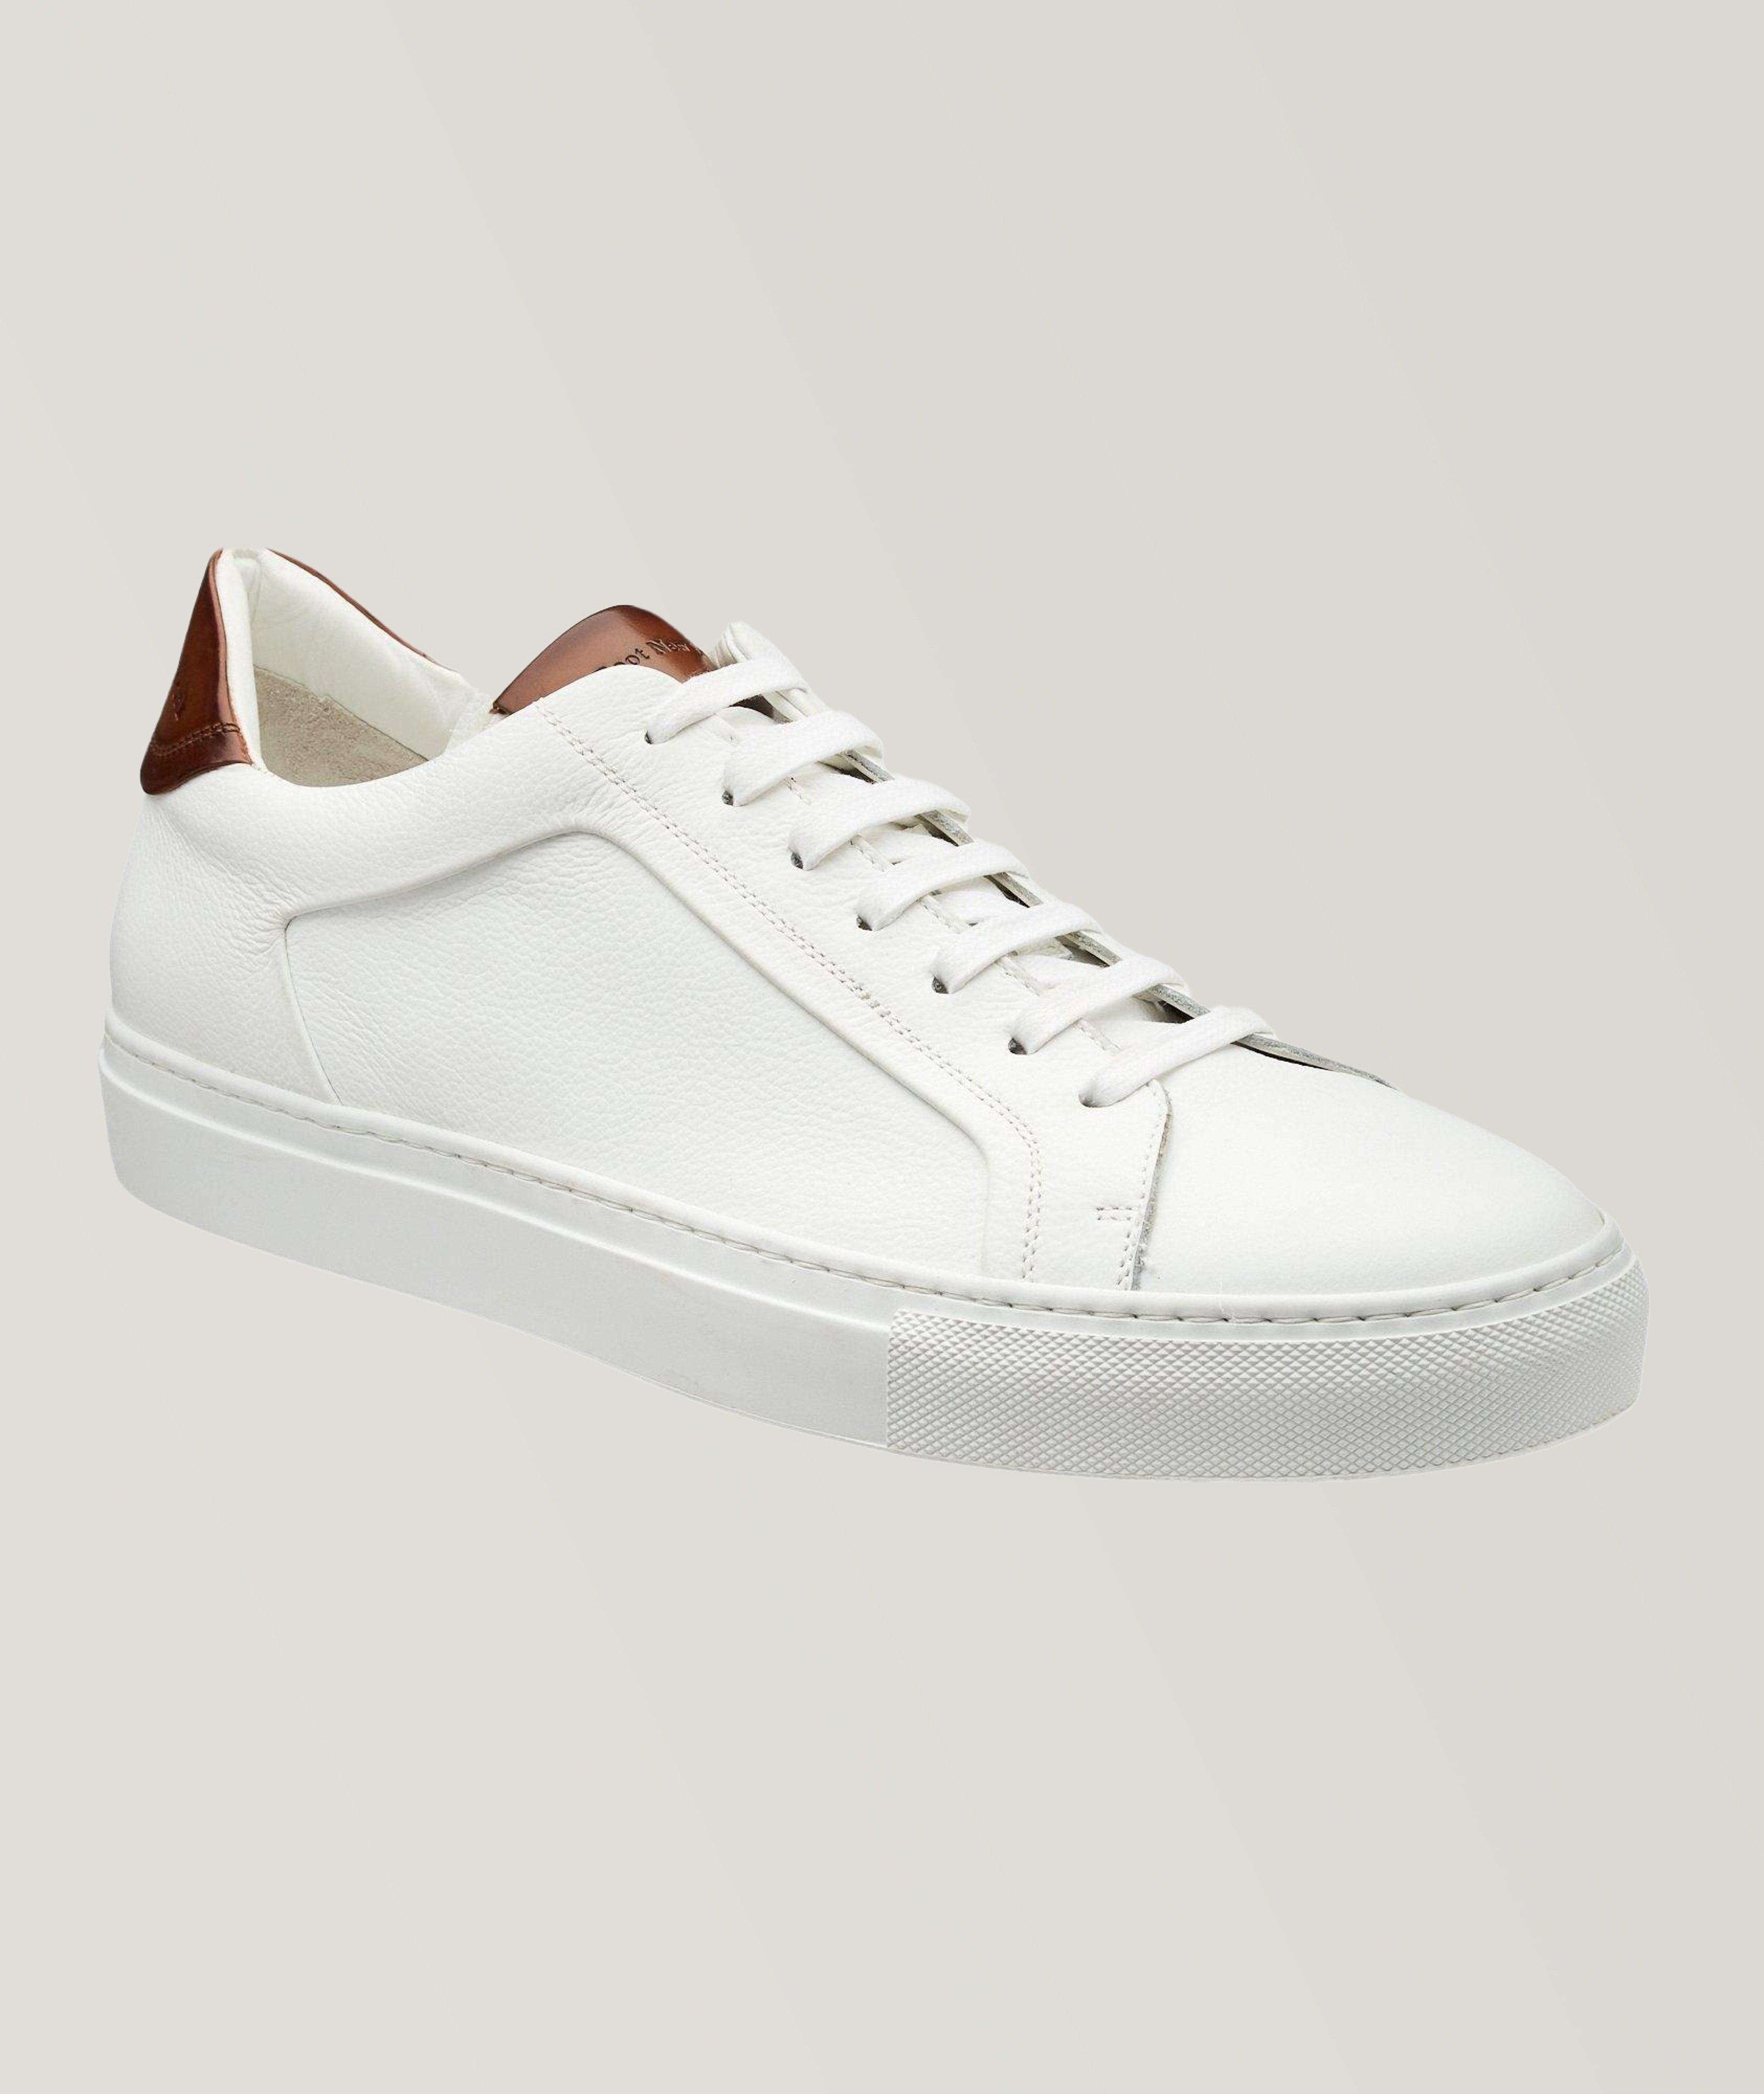 Soft Tumbled Leather Low-Tops image 0